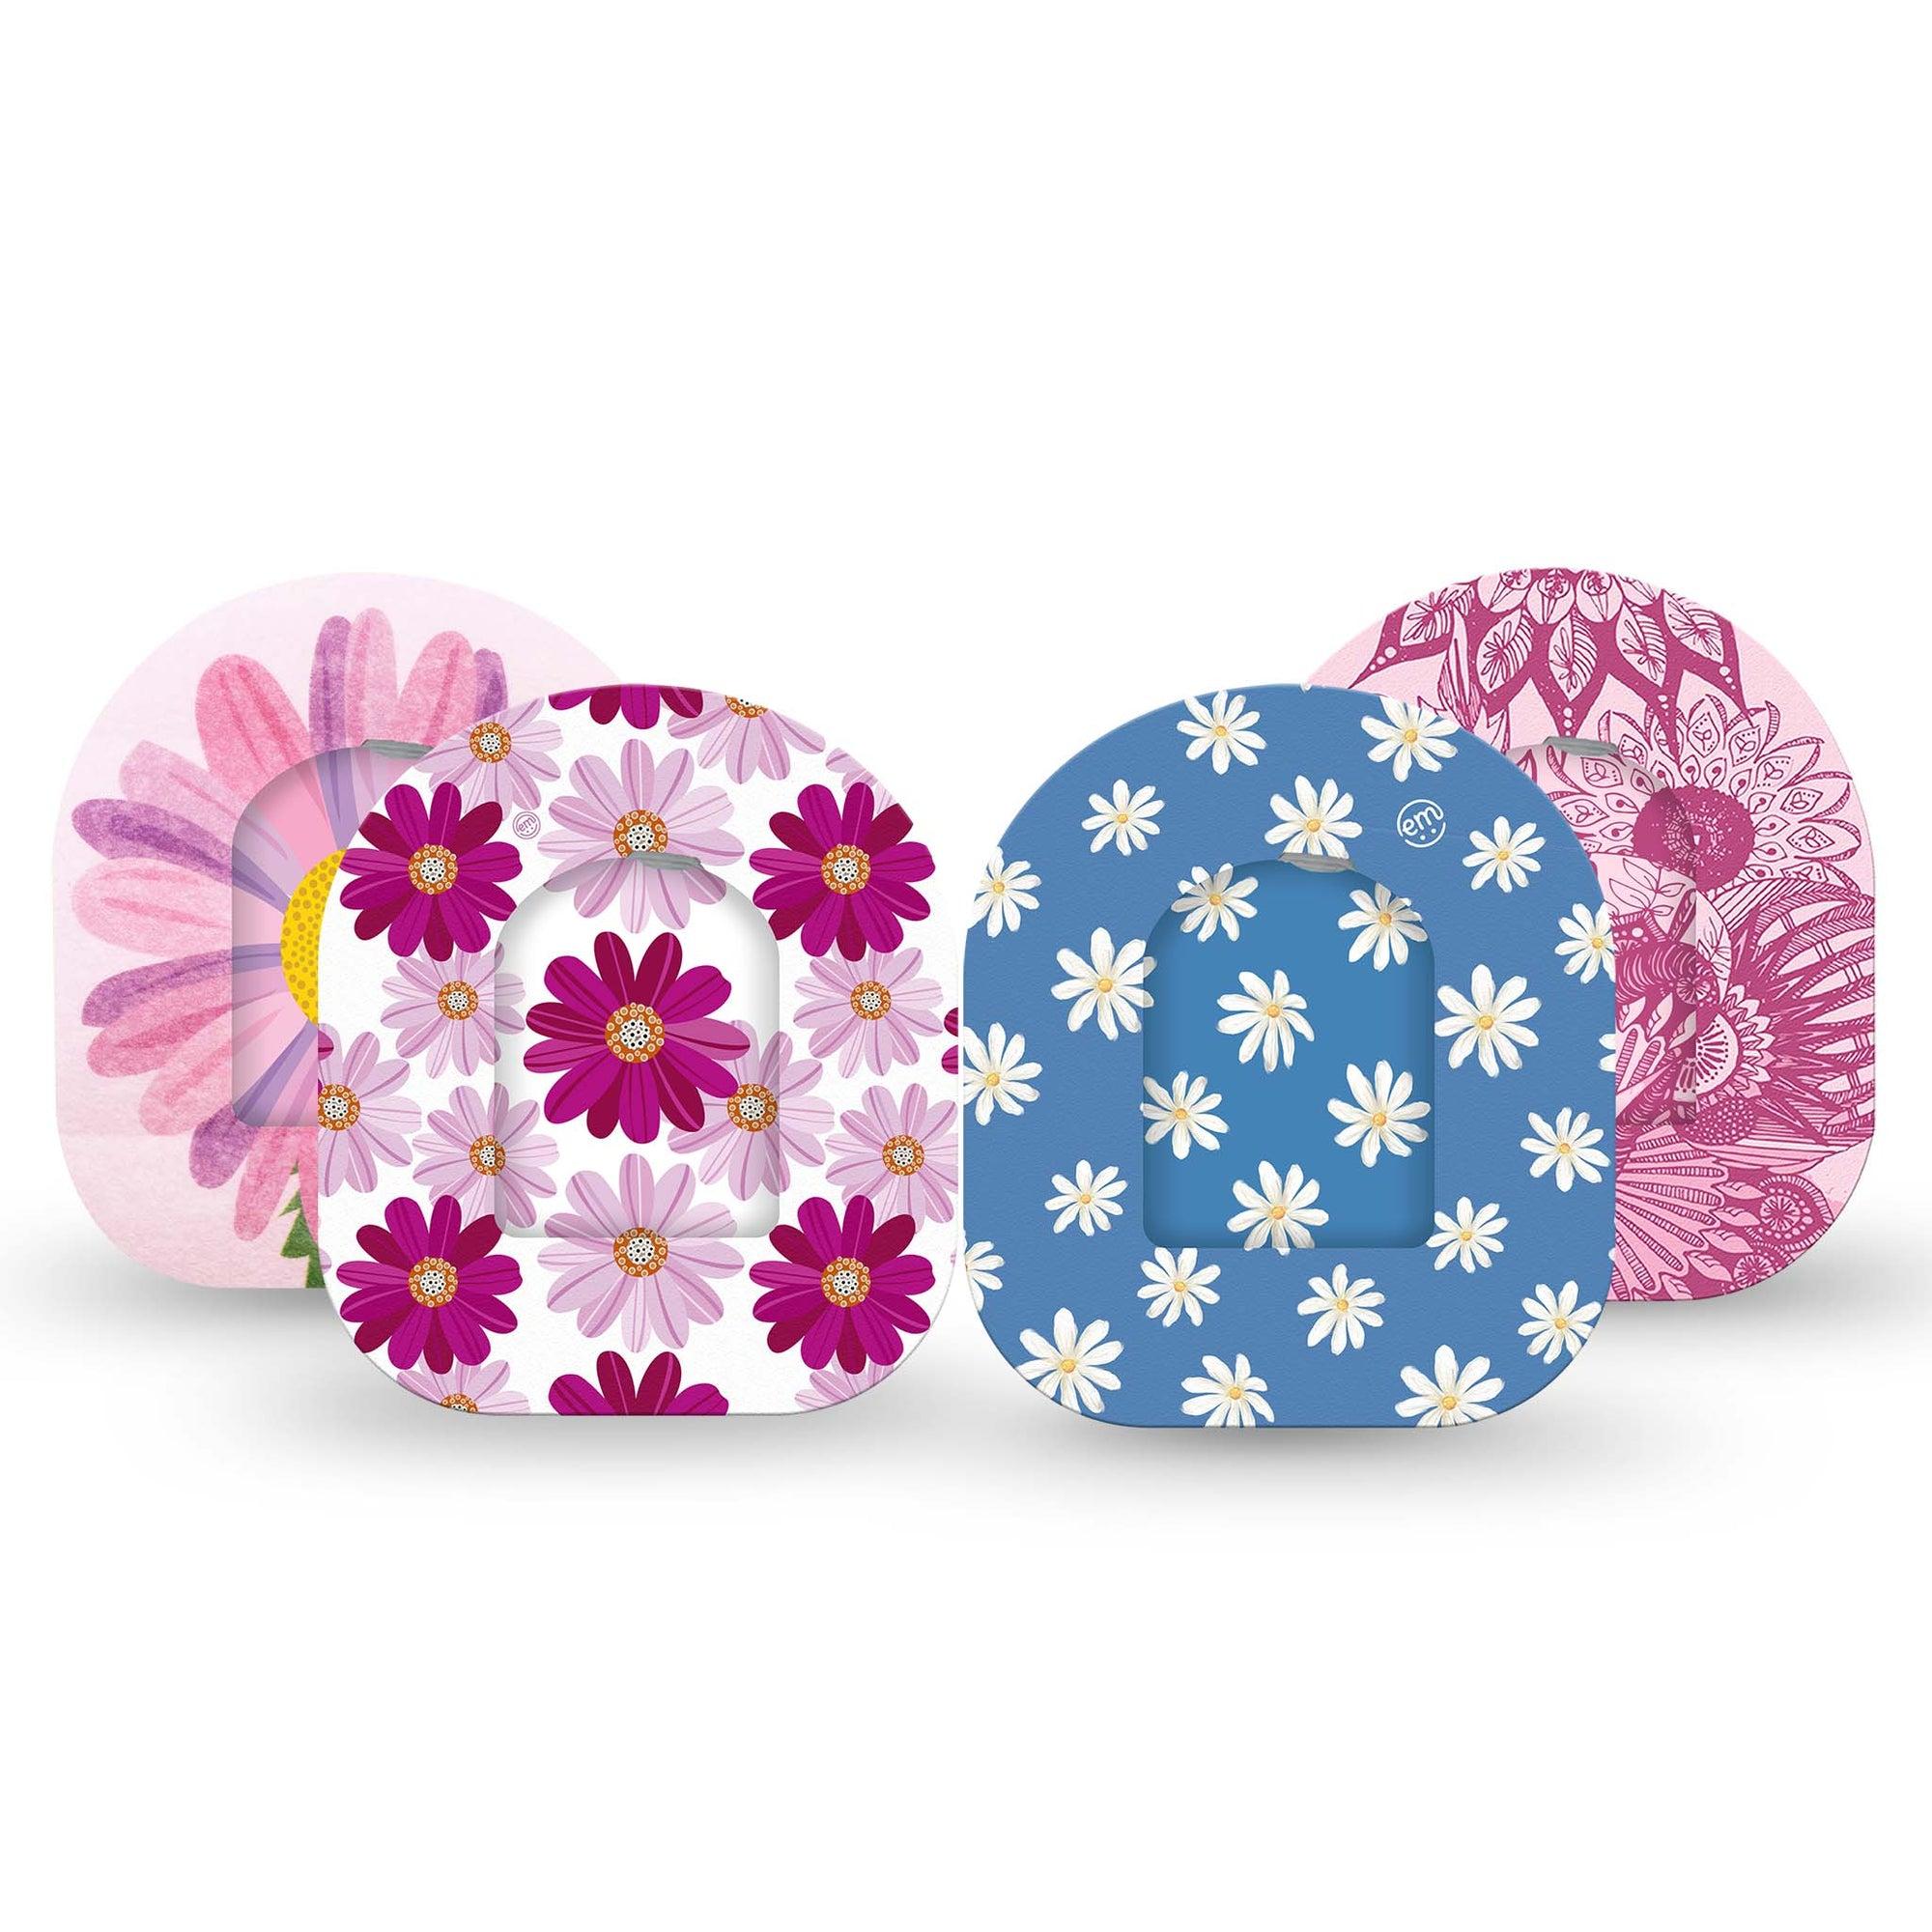 ExpressionMed Daisy Chain Variety Pack Pod Tape and Sticker, 8-Pack, Blossom Melody Inspired, CGM Sticker and Tape Design